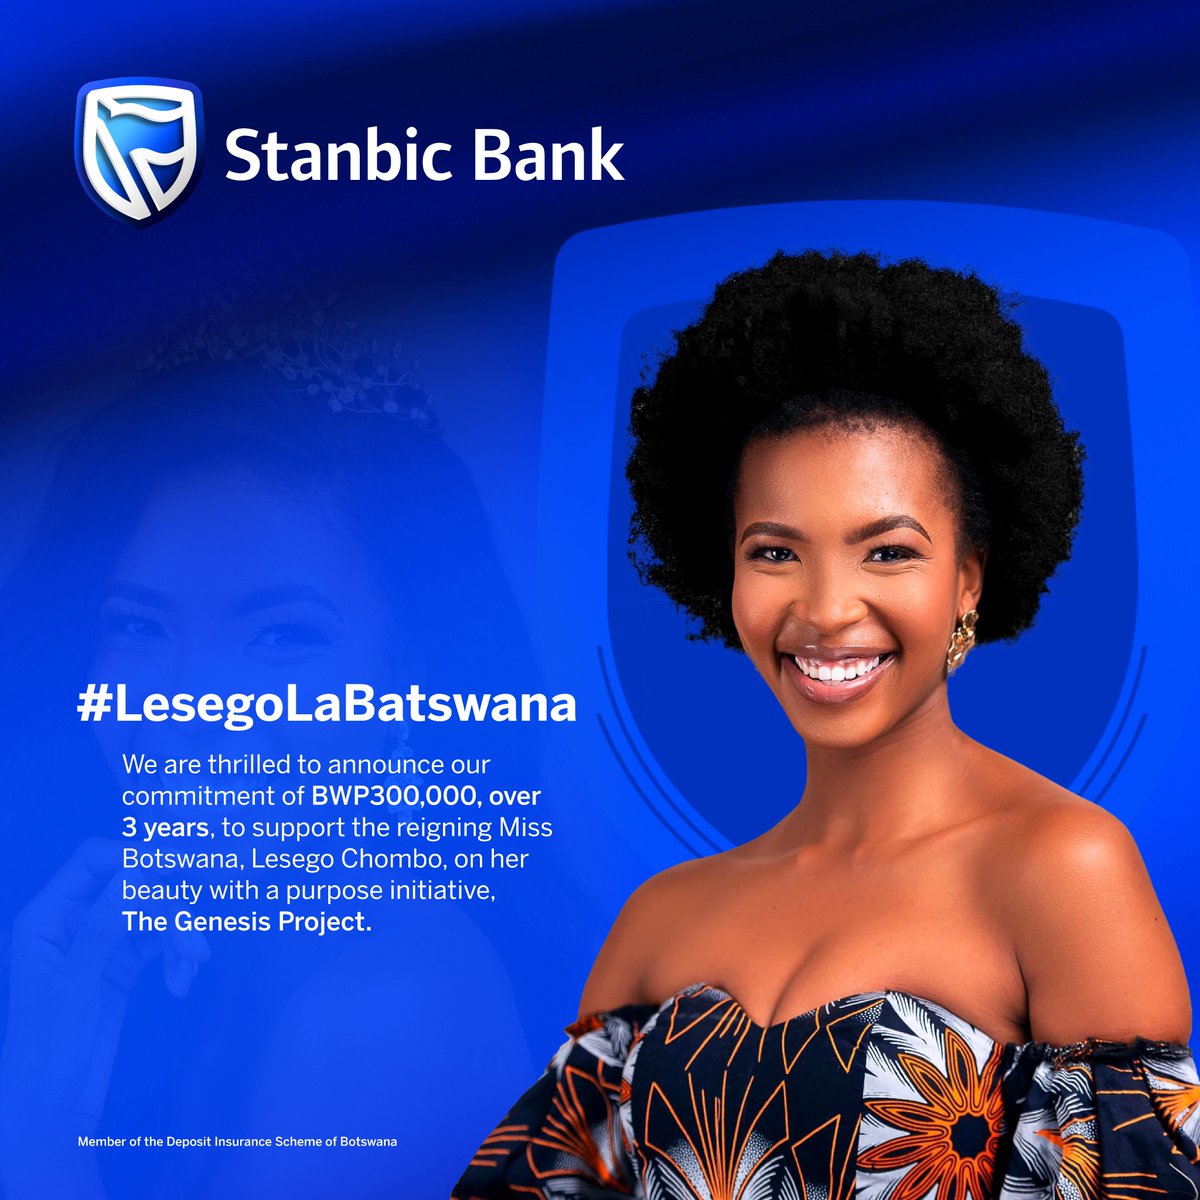 We are thrilled to announce our commitment of BWP300,000, over 3 years, to support the reigning Miss Botswana, Lesego Chombo, on her beauty with a purpose initiative, The Genesis Project. 

#LesegoLaBatswana #StanbicBank